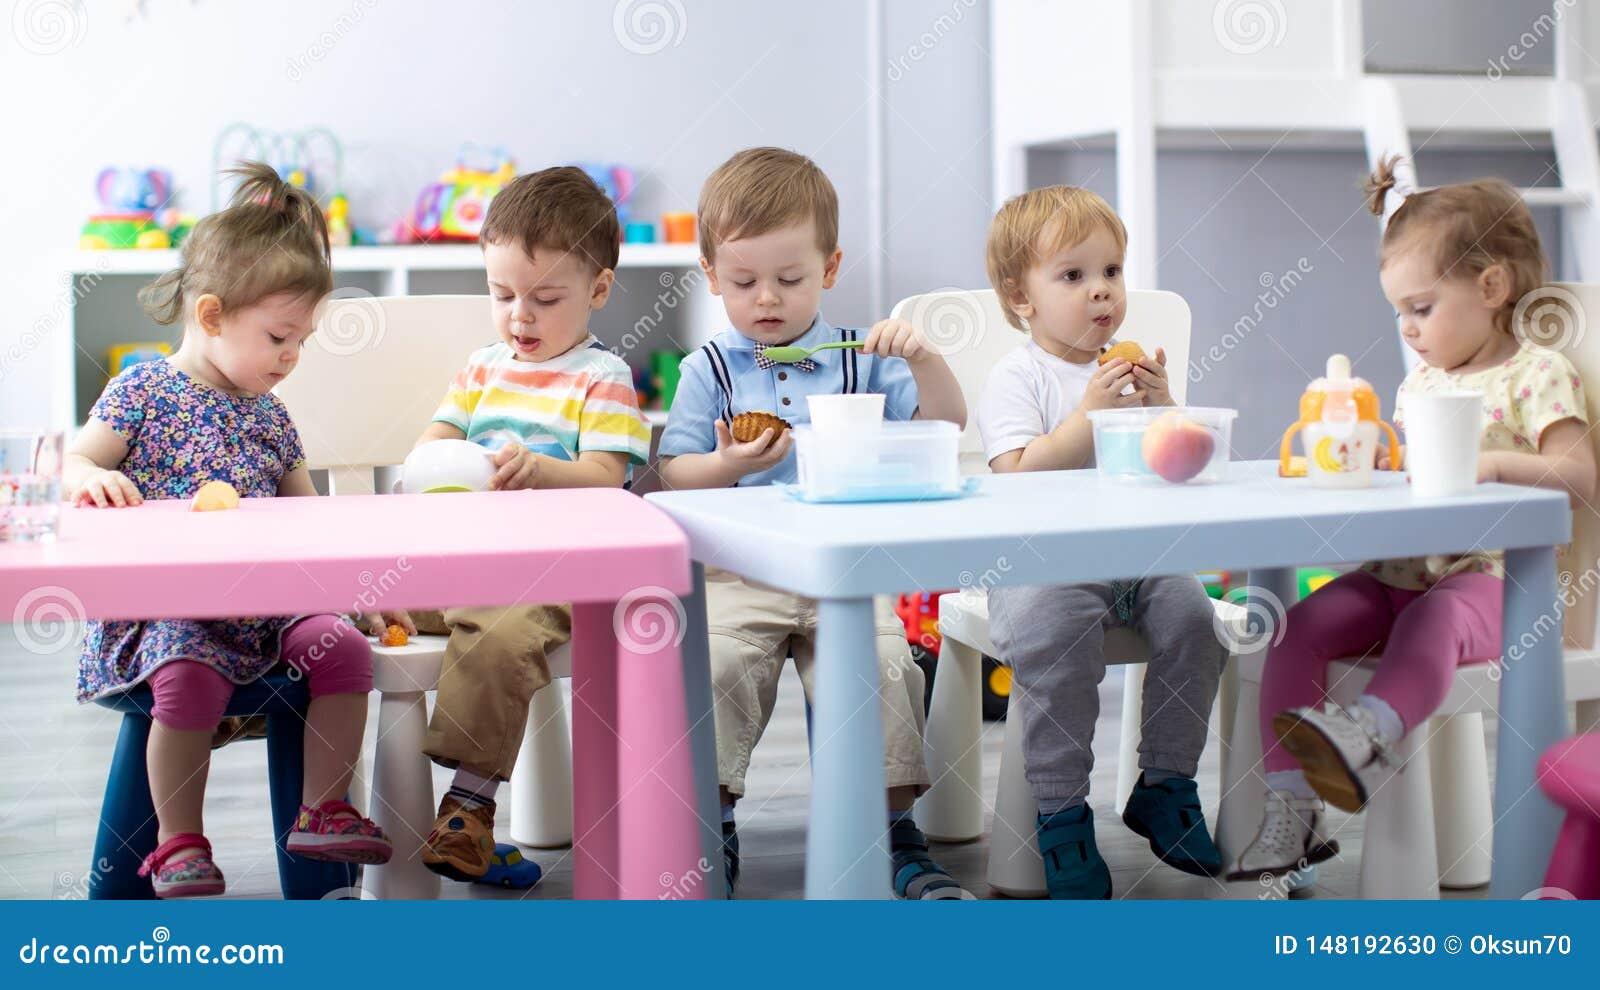 nursery babies eating food. kids have lunch in daycare